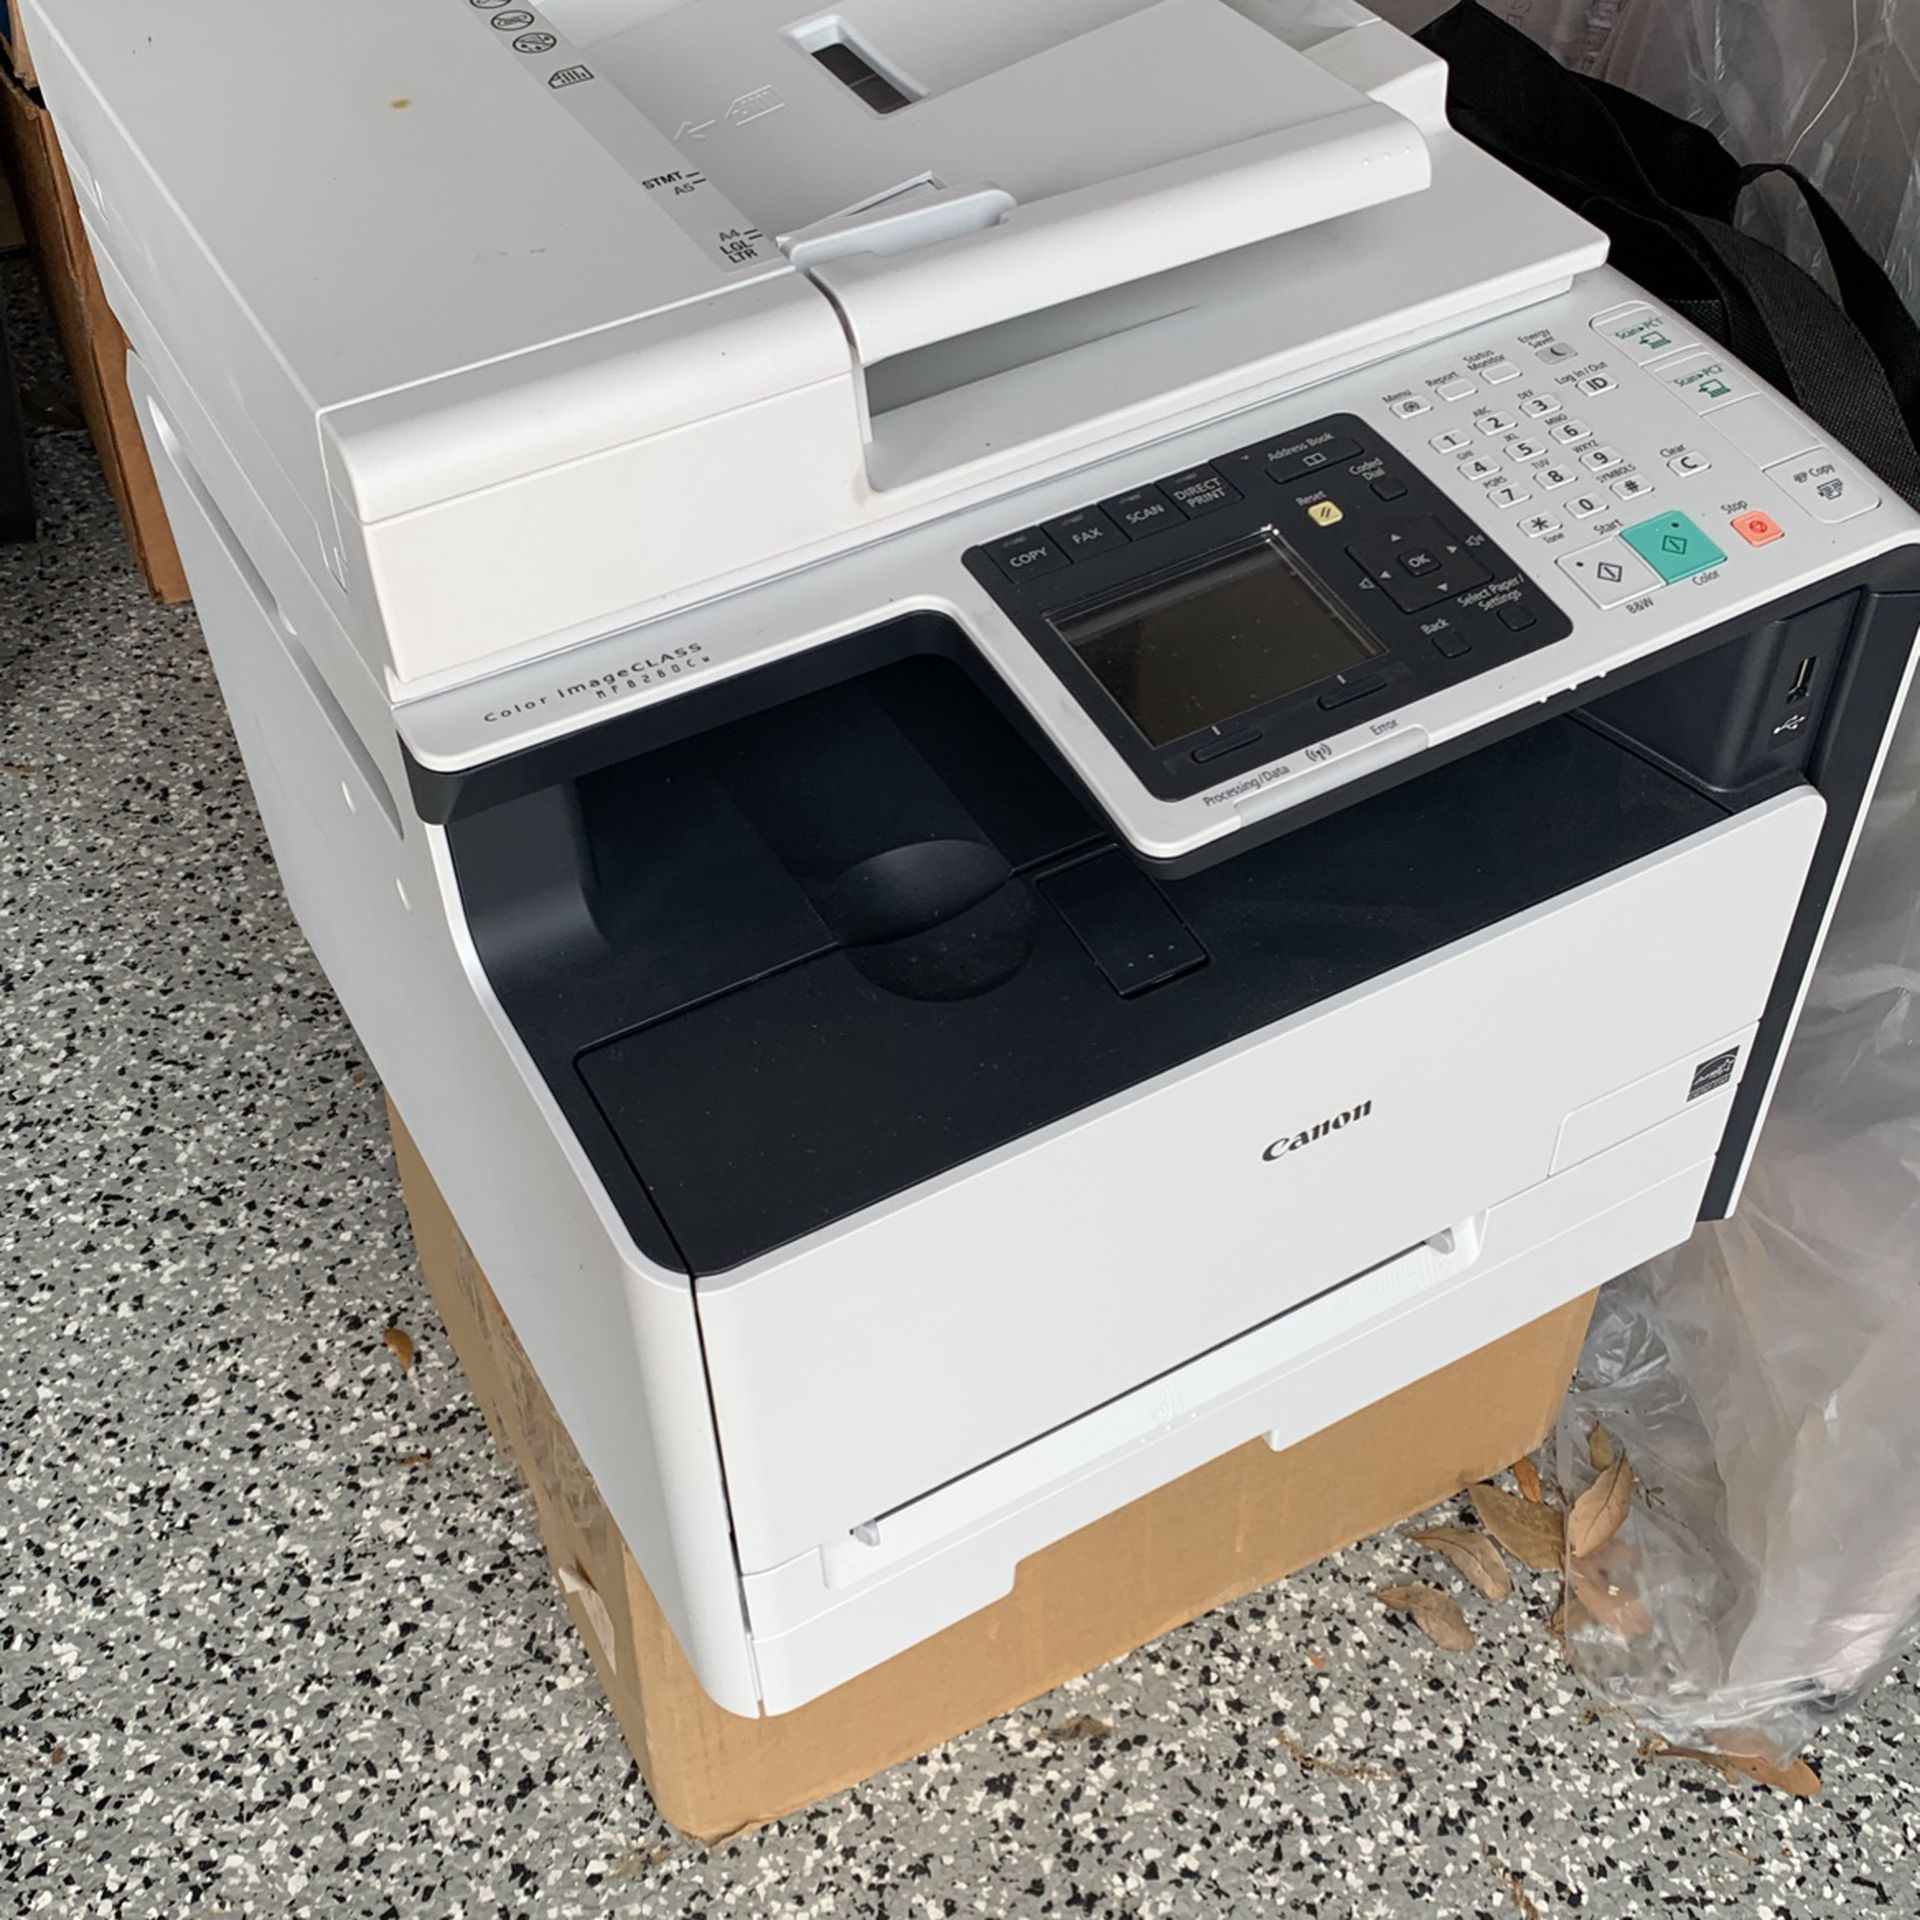 Canon Color Image Class Lazer Printer With Two Boxes Of Toner Cartridges 